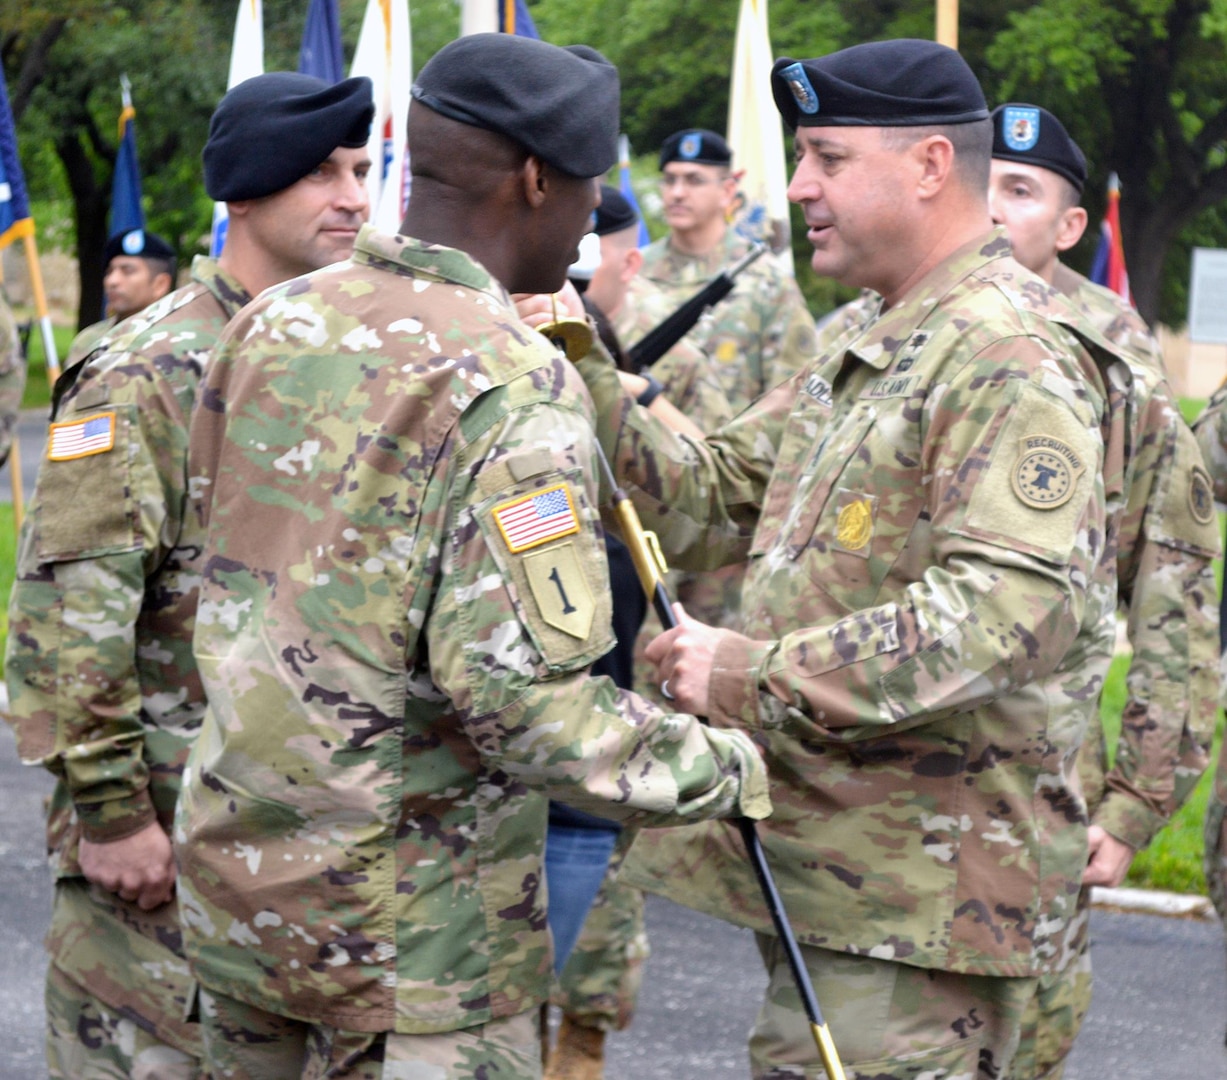 Command Sgt. Maj. Stephen Badley (right), outgoing command sergeant major for the U.S. Army’s 5th Recruiting Brigade at Joint Base San Antonio-Fort Sam Houston, relinquishes the NCO sword to Col. Terance Huston (center), brigade commander, during the brigade’s change of responsibility ceremony March 24 at the historic quadrangle on JBSA-Fort Sam Houston.